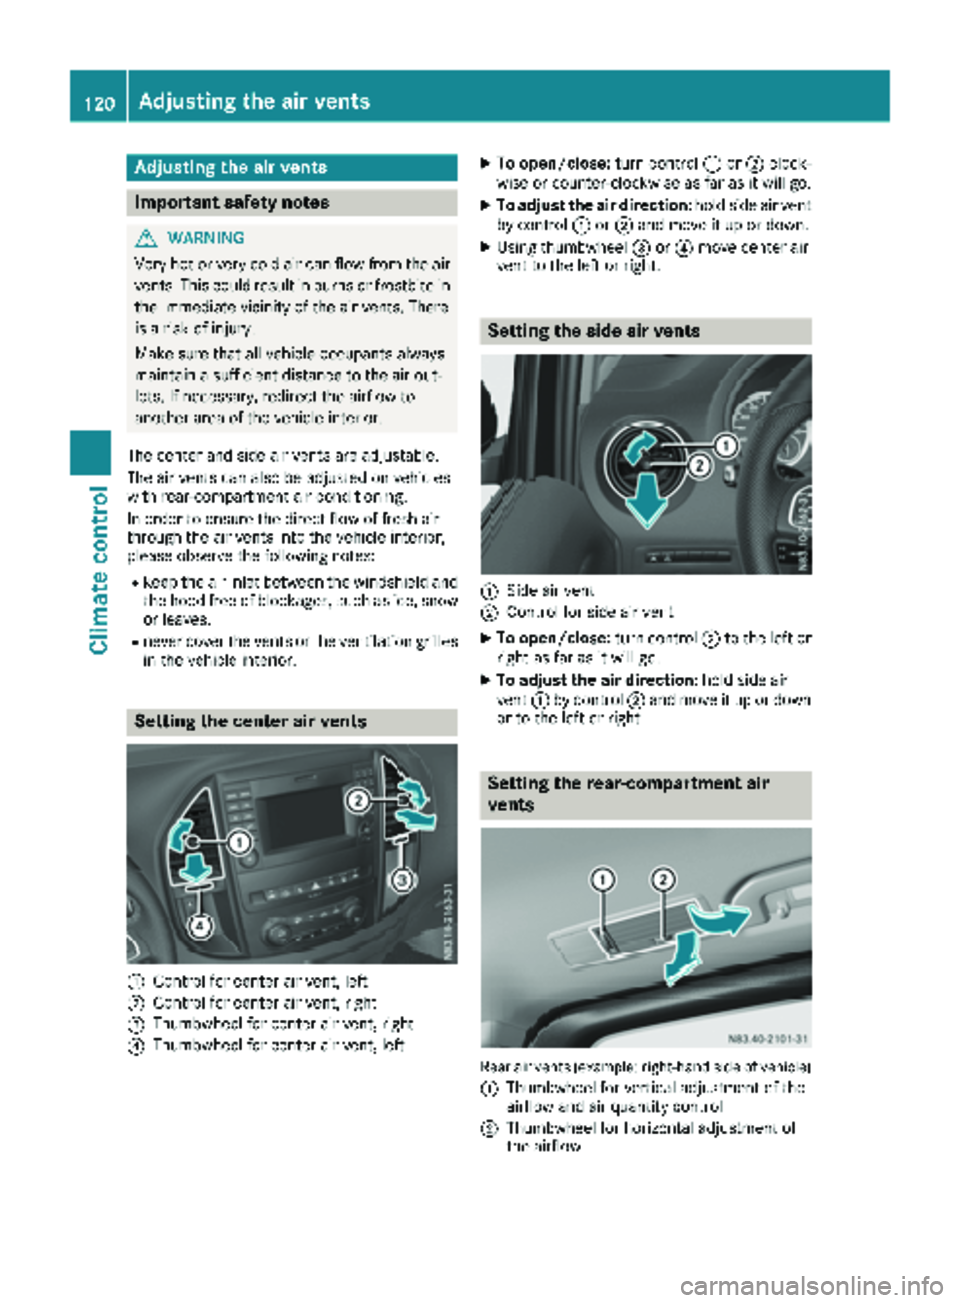 MERCEDES-BENZ METRIS 2019  MY19 Operator’s Manual Adjusting the air vents
Important safety notes
GWARNIN G
Ver yhot or ver ycold air can flo wfrom th eair
vents .This could result in burn sor frostbit ein
th eimmediat evicinity of th eair vents .Ther